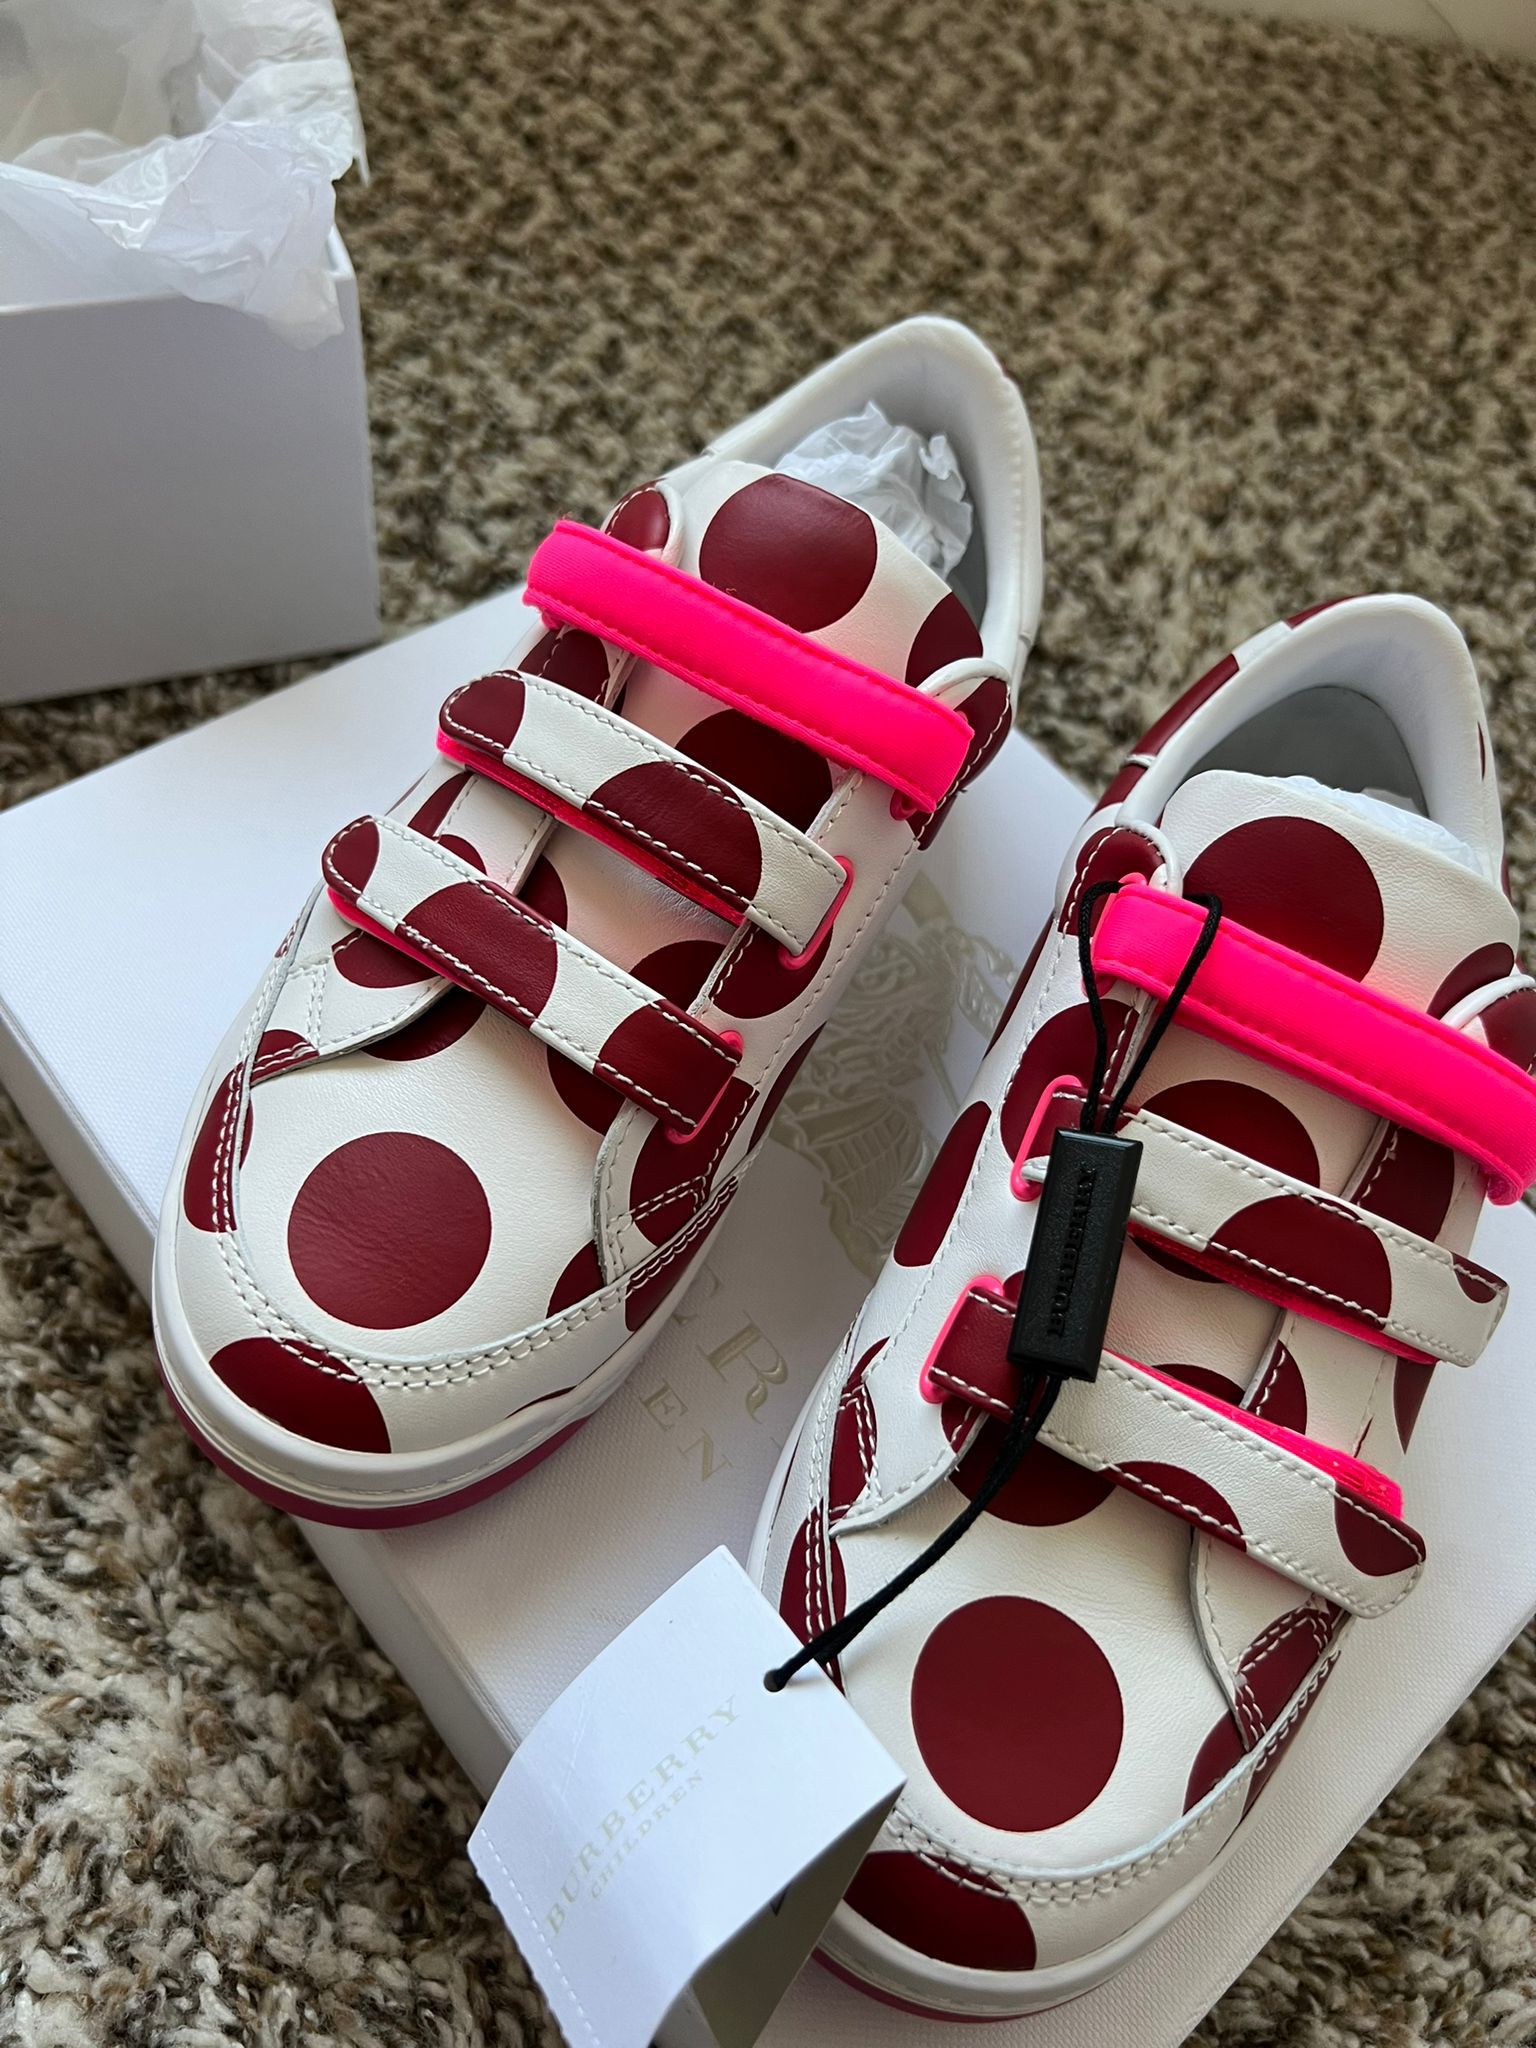 NEW AUTHENTIC KIDS BURBERRY SNEAKERS SIZE 32 And 33 -$125 Each 